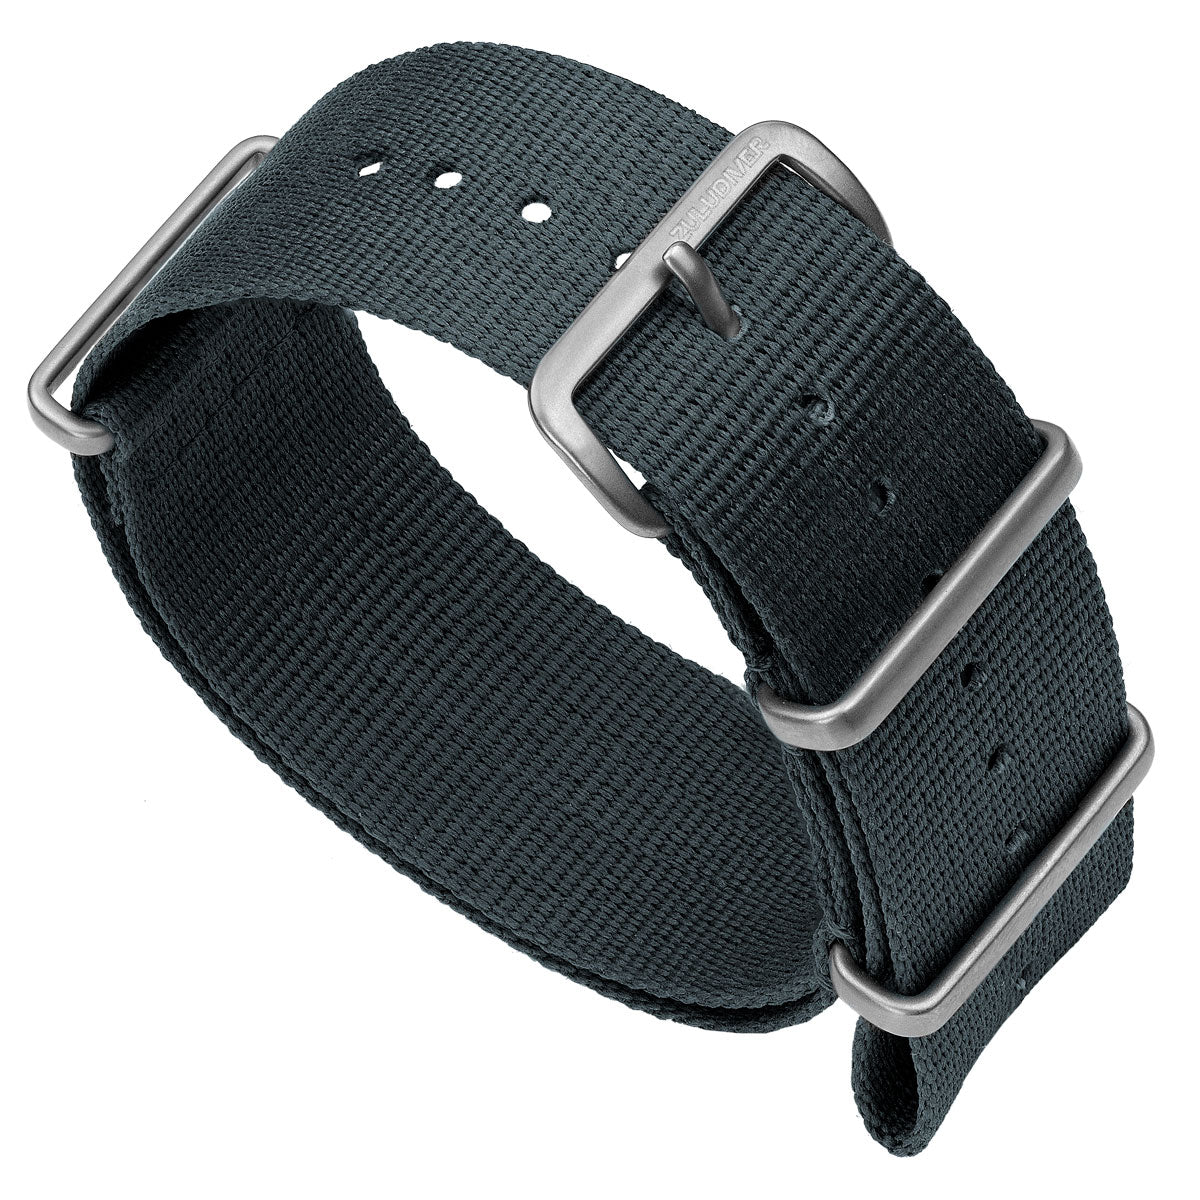 Military NATO watch strap, colour admiralty grey with satin finish hardware